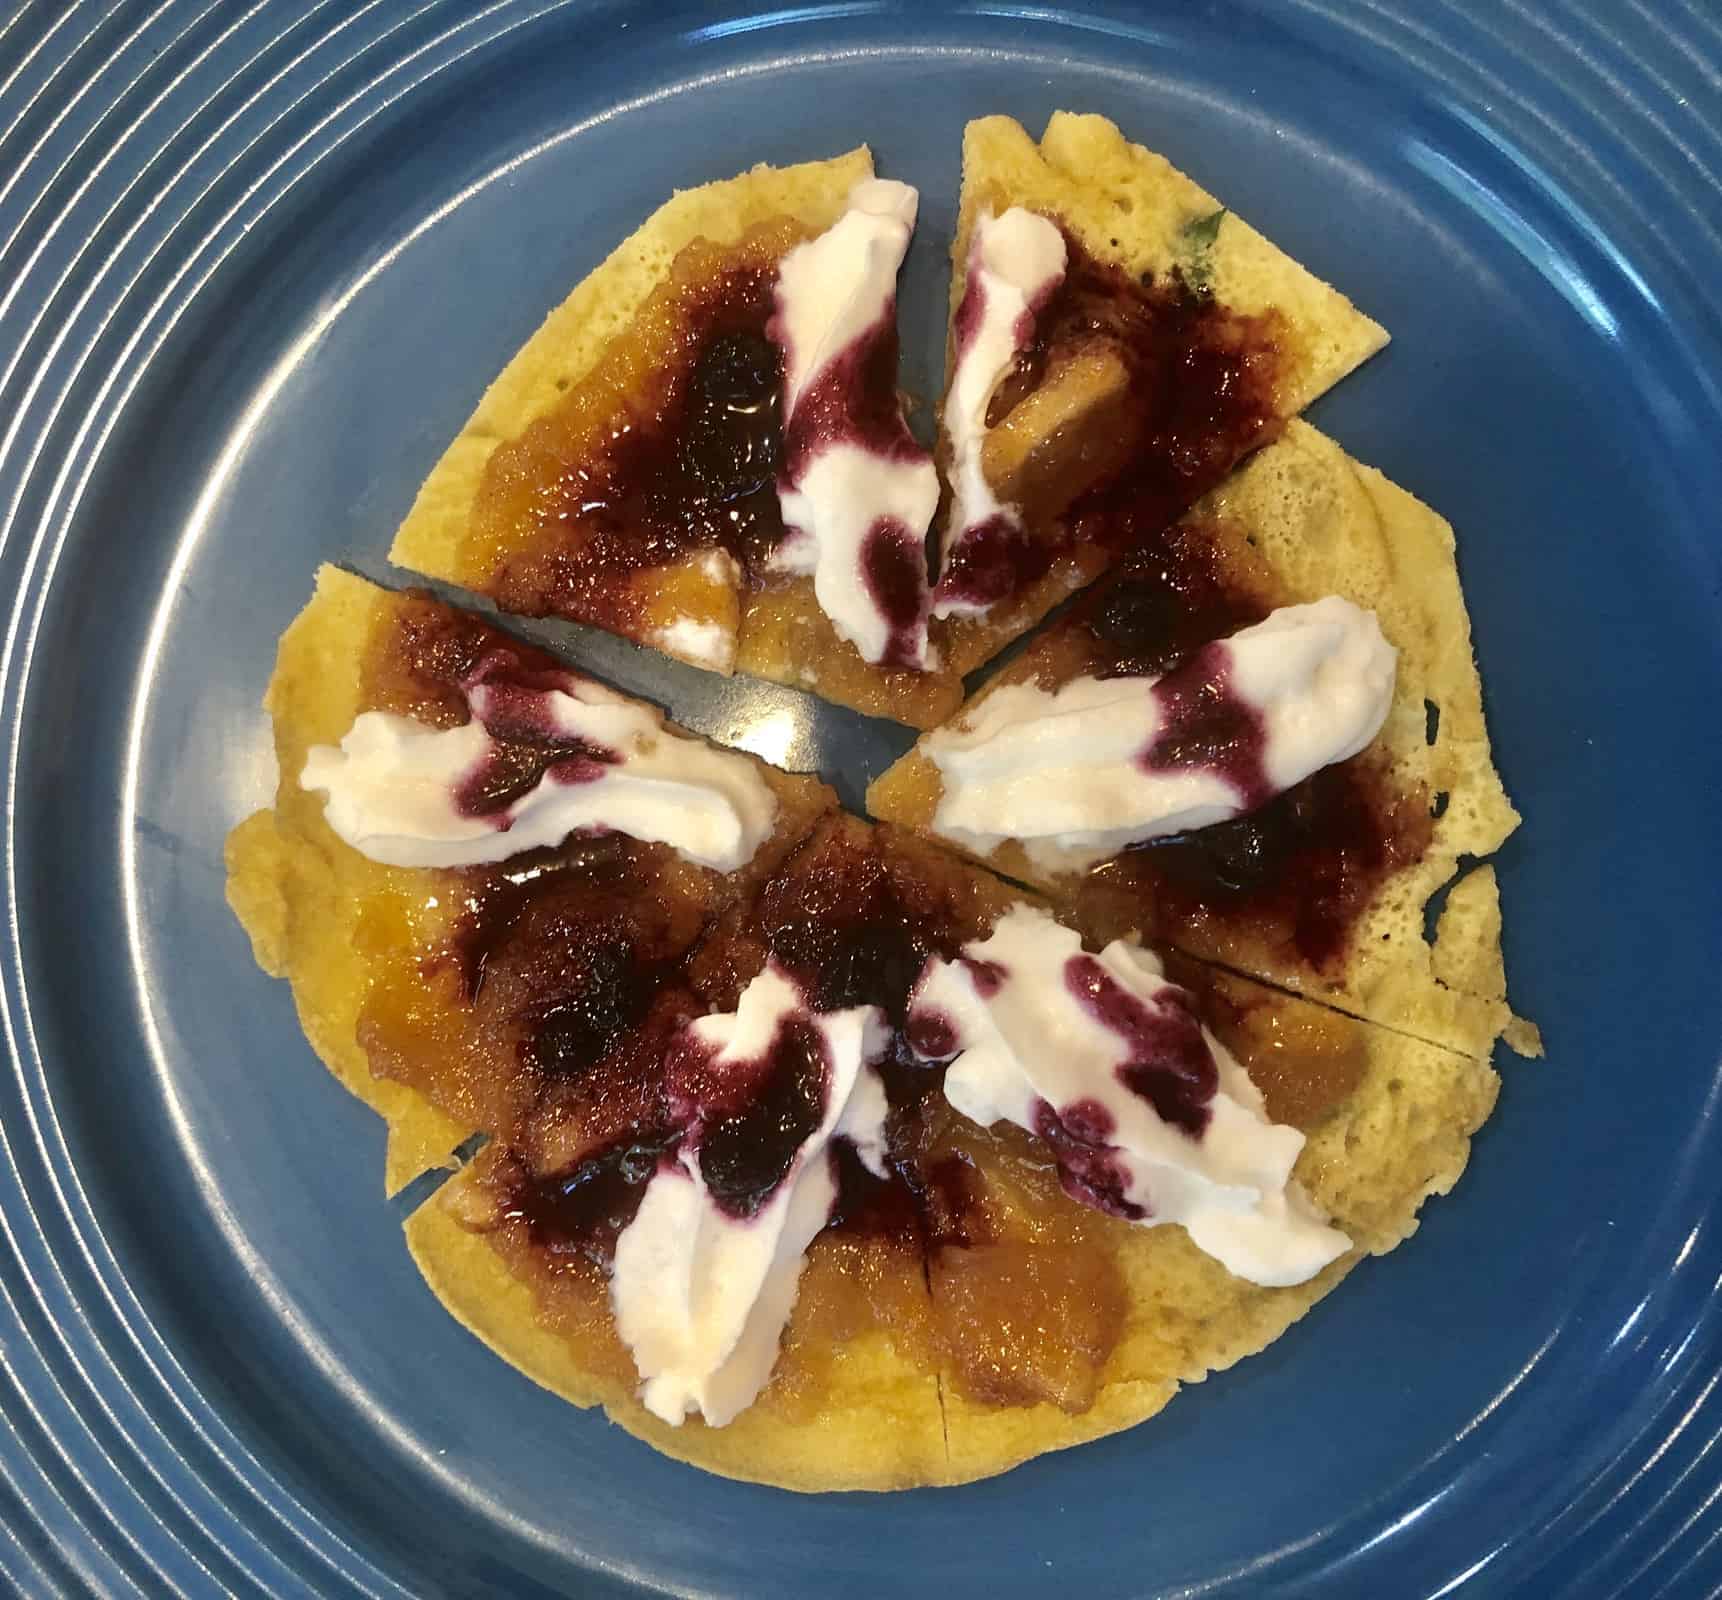 A Chickpea Crepe Pizza with whipped cream and berry jam on a blue plate